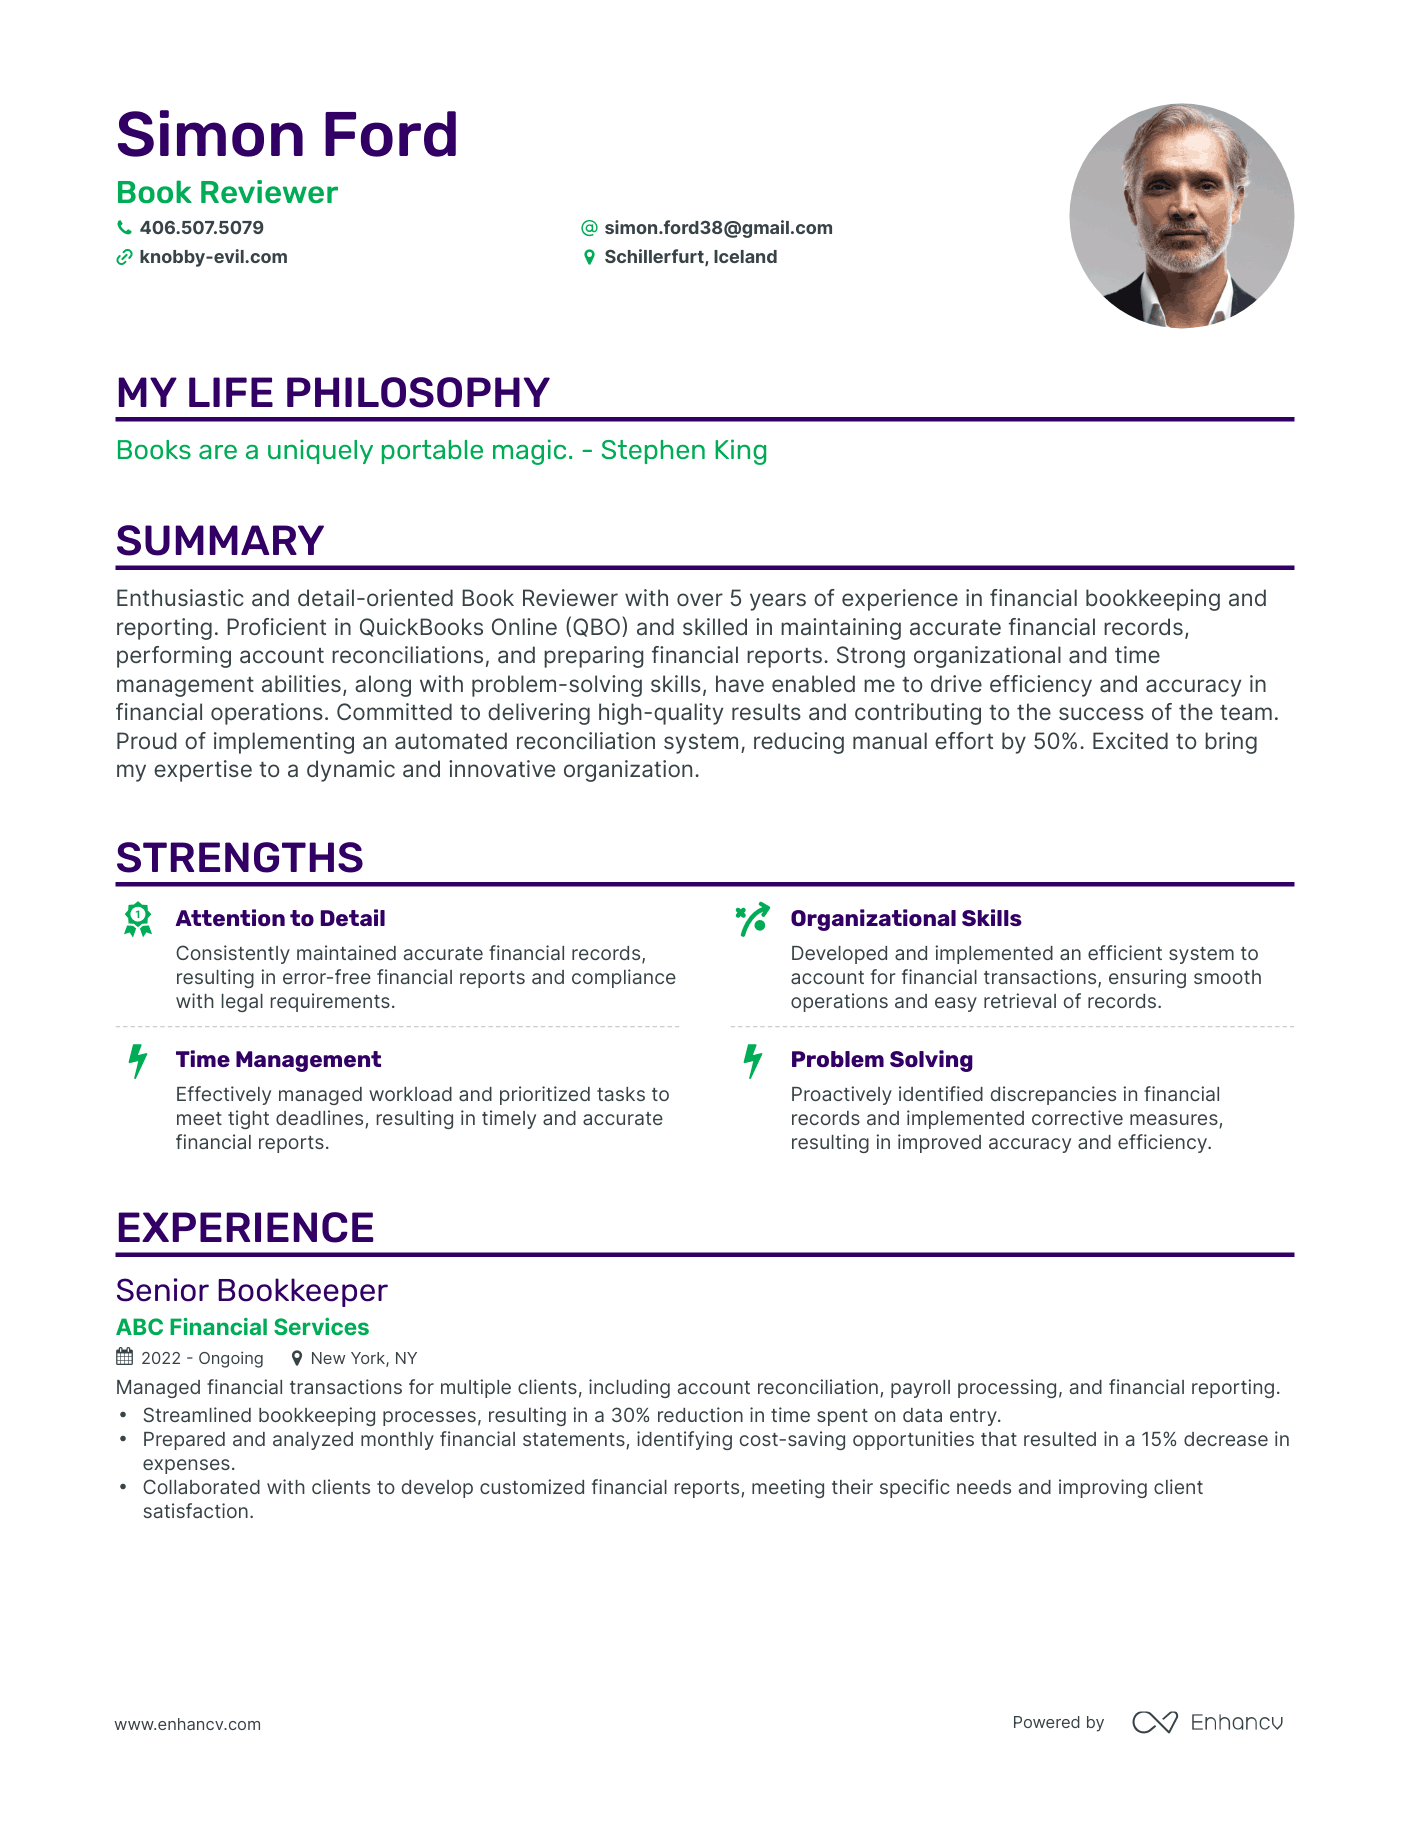 Creative Book Reviewer Resume Example